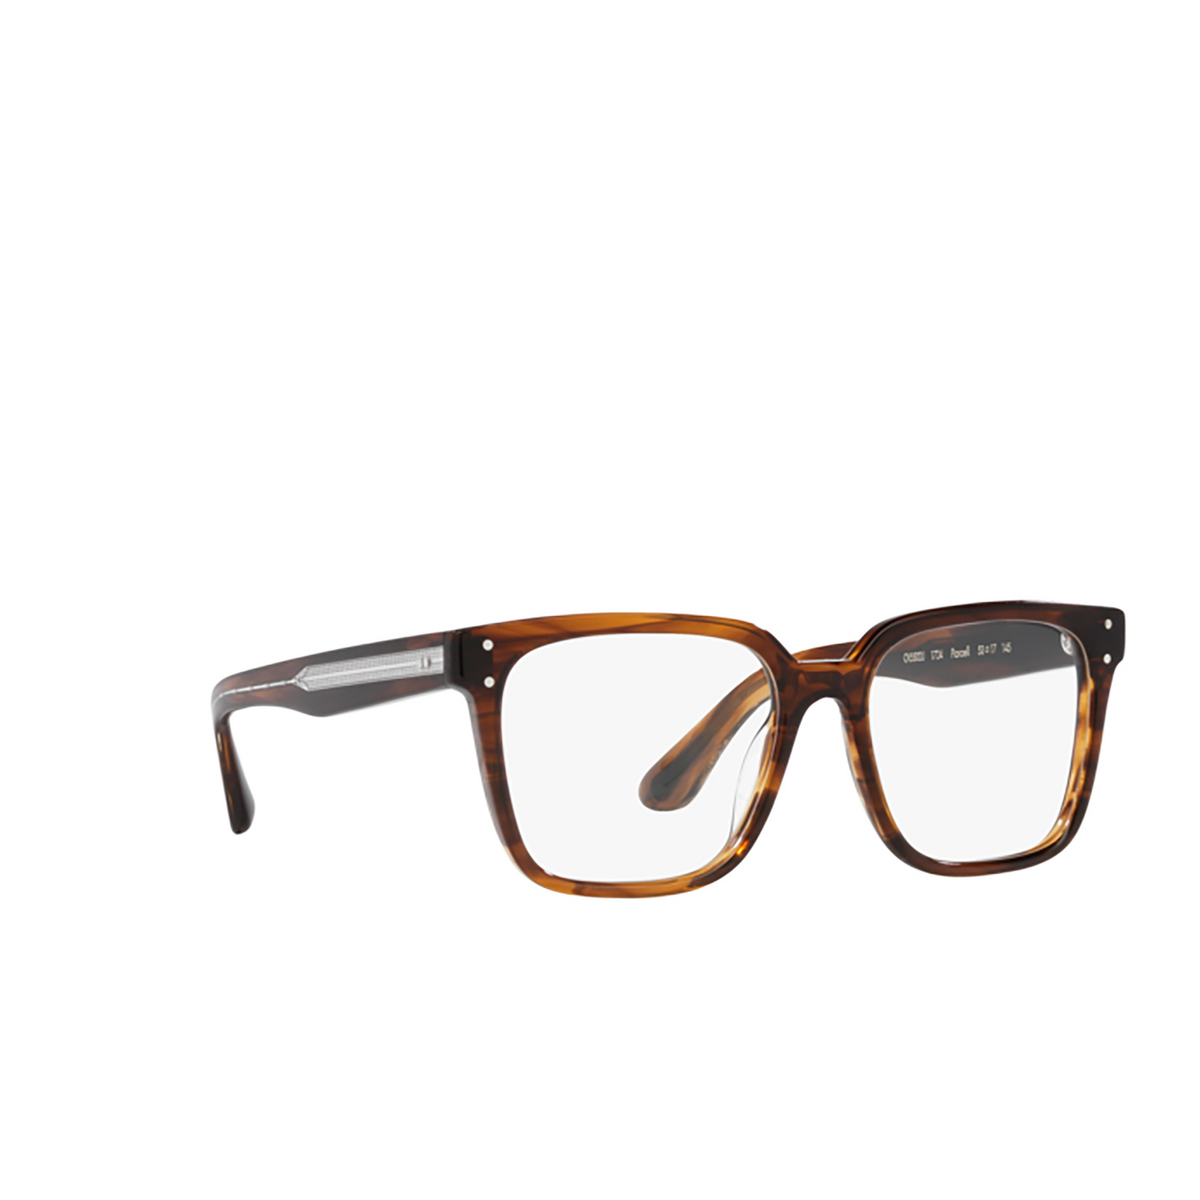 Oliver Peoples PARCELL Eyeglasses 1724 Tuscany Tortoise - three-quarters view